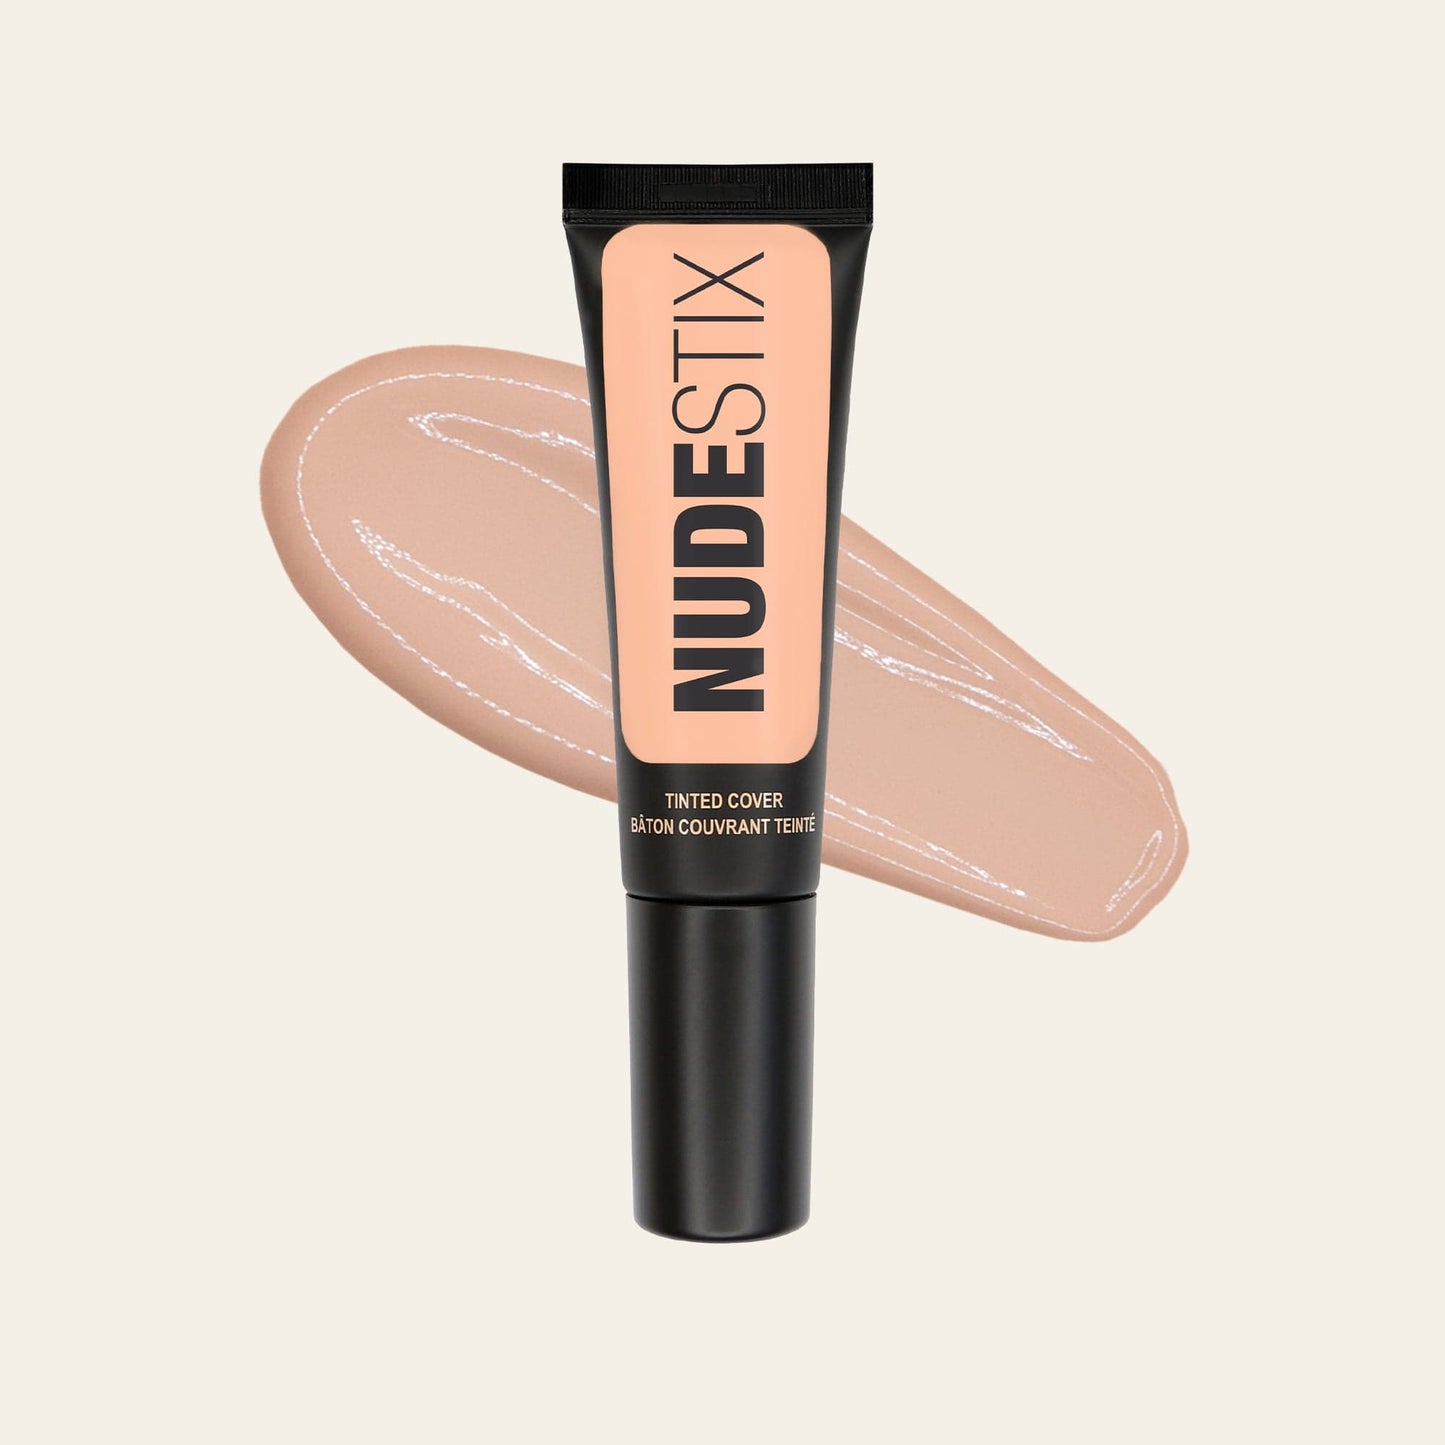 Tinted Cover Liquid Foundation in shade Nude 3